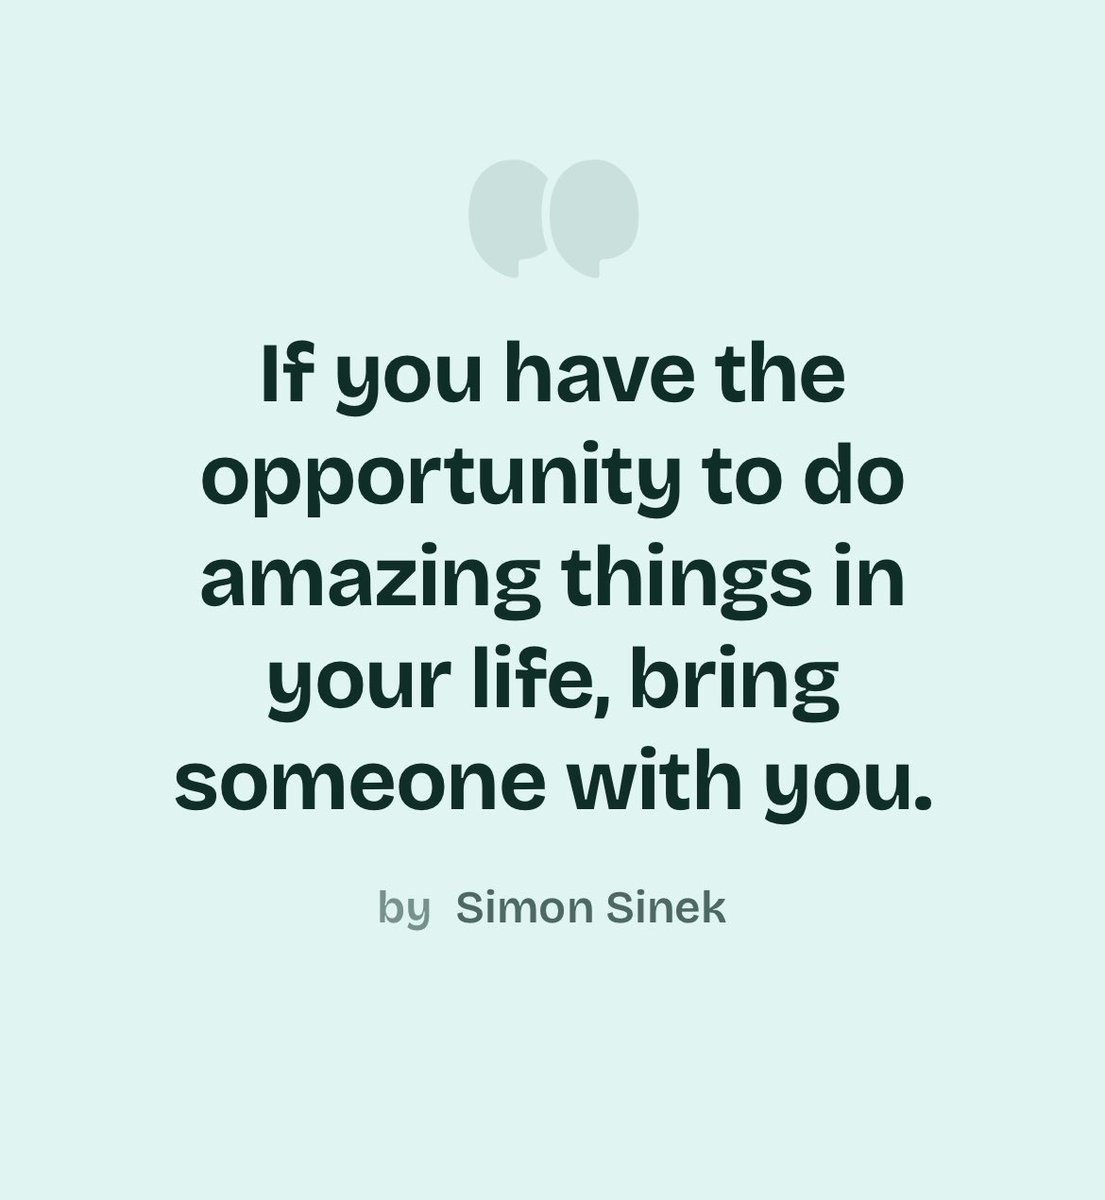 “If you have the opportunity to do amazing things in your life, bring someone with you.”
by Simon Sinek

#quoteoftheday #dailyquote